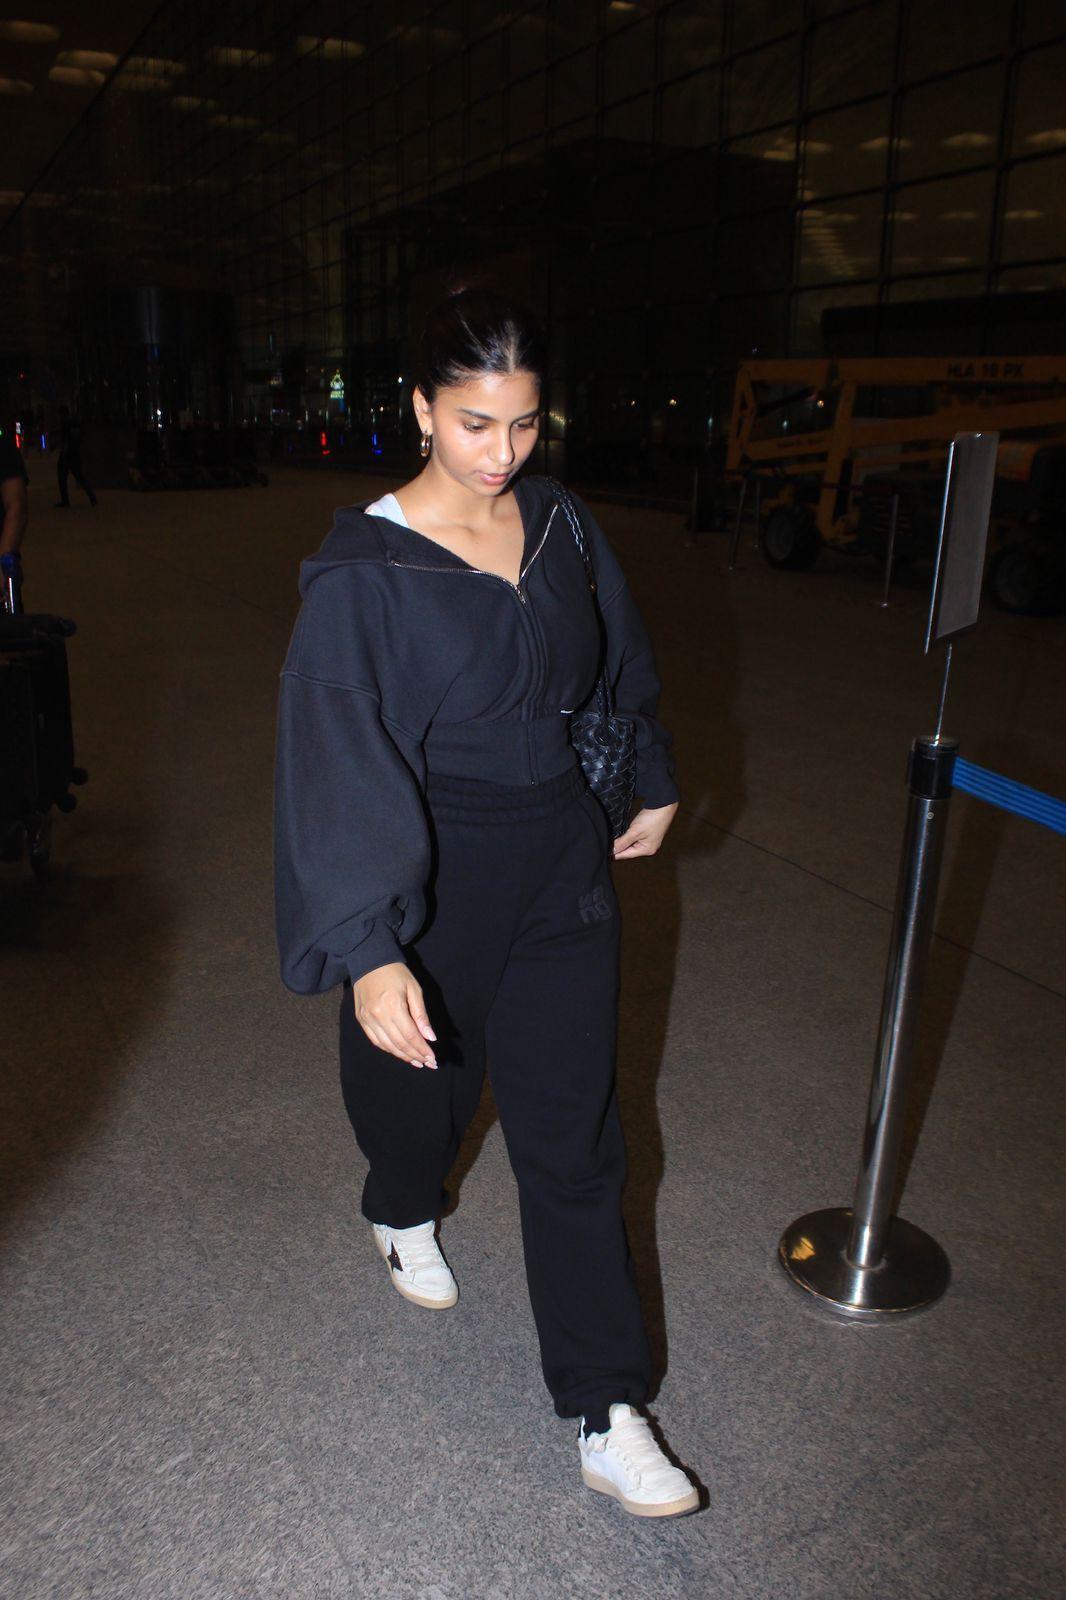 Suhana Khan aced her airport look in an all-black outfit